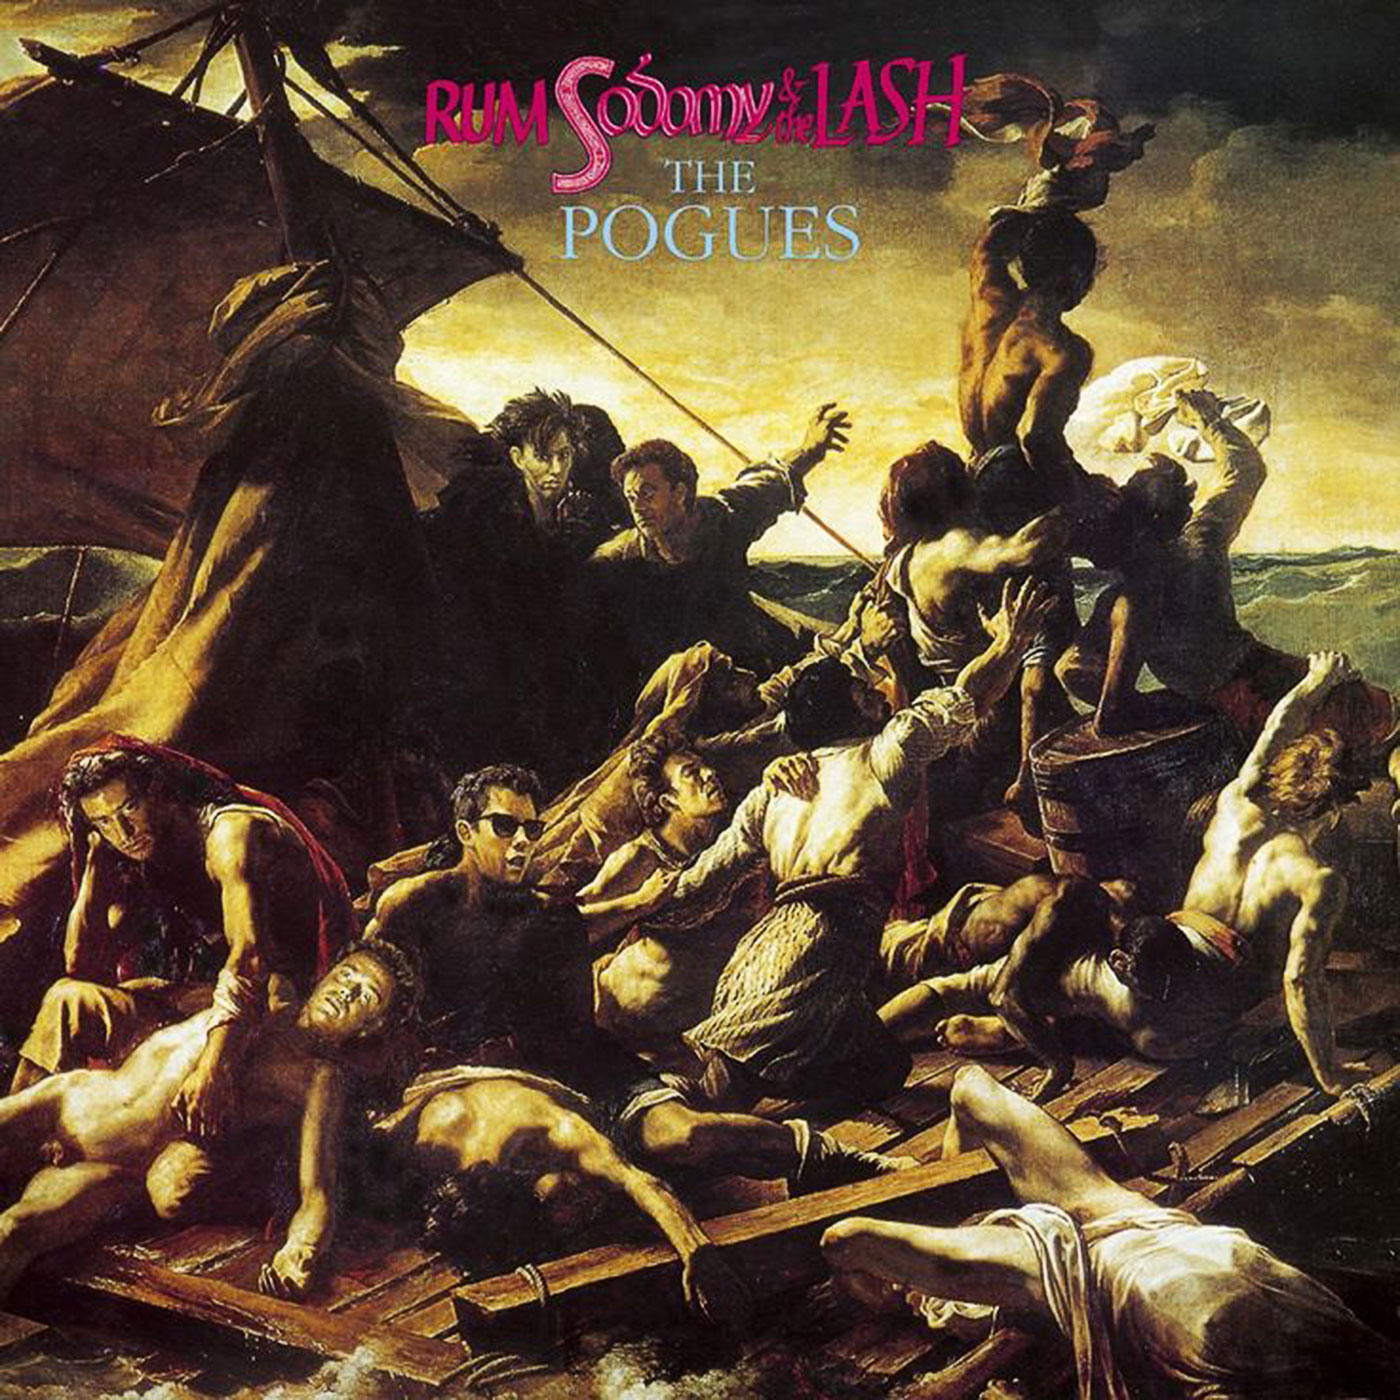 556 The Pogues – Rum Sodomy and the Lash